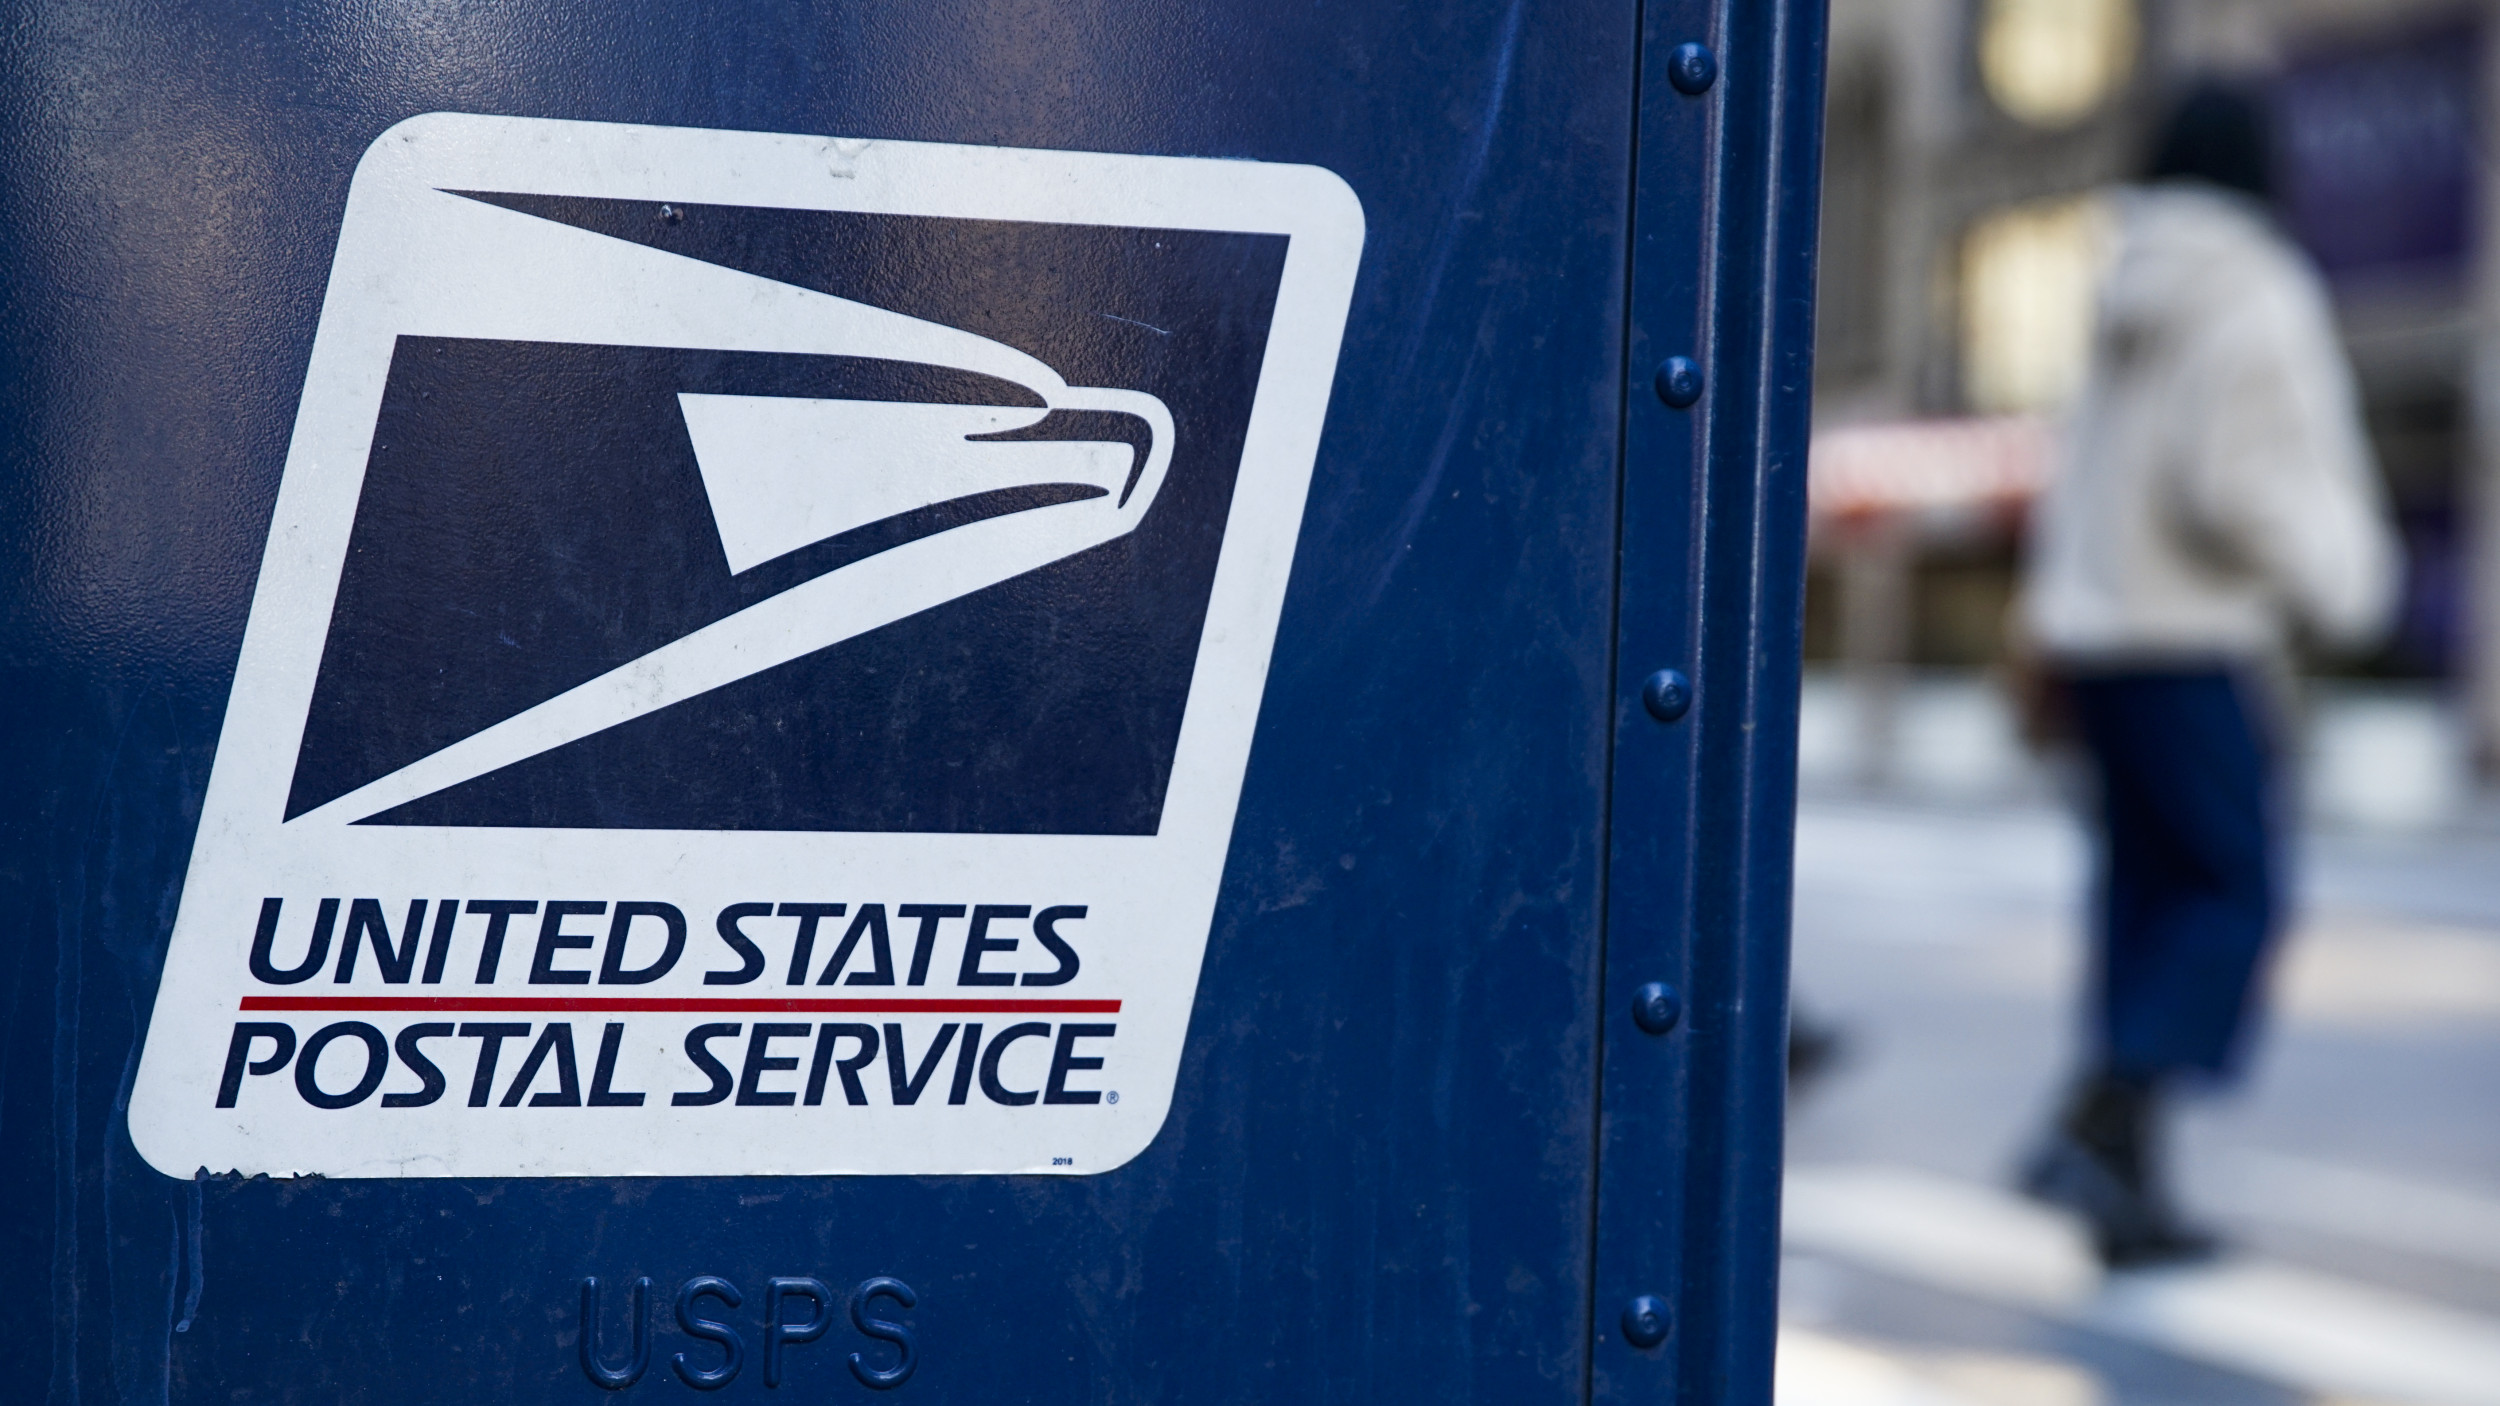 The Post Office on Thanksgiving—hours of operation and delivery information revealed